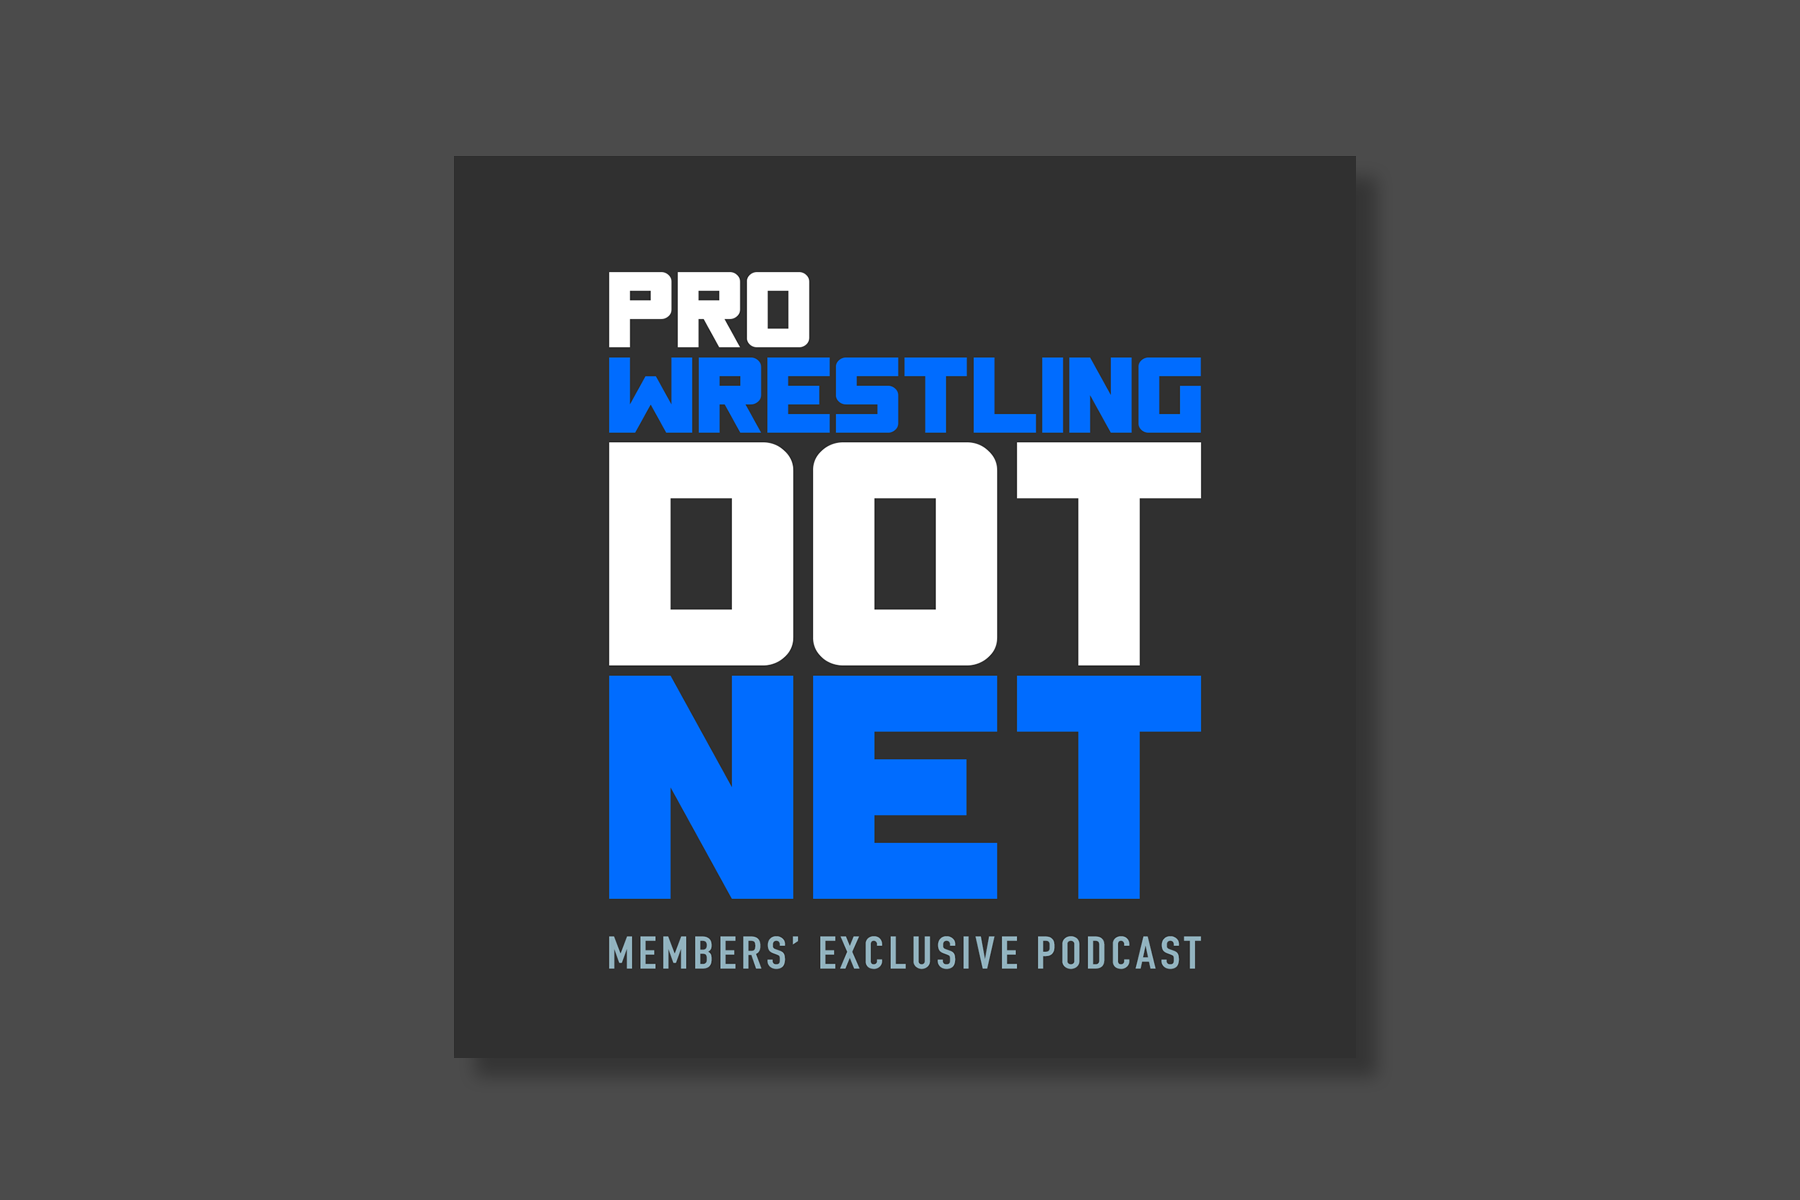 03/02 Dot Net Weekly audio show: Barnett and Powell make their AEW Revolution predictions and grade the storyline build, and discuss Tony Khan’s media call, WrestleMania 39 developments, MLW likely losing its spot on Reelz, AEW Dynamite